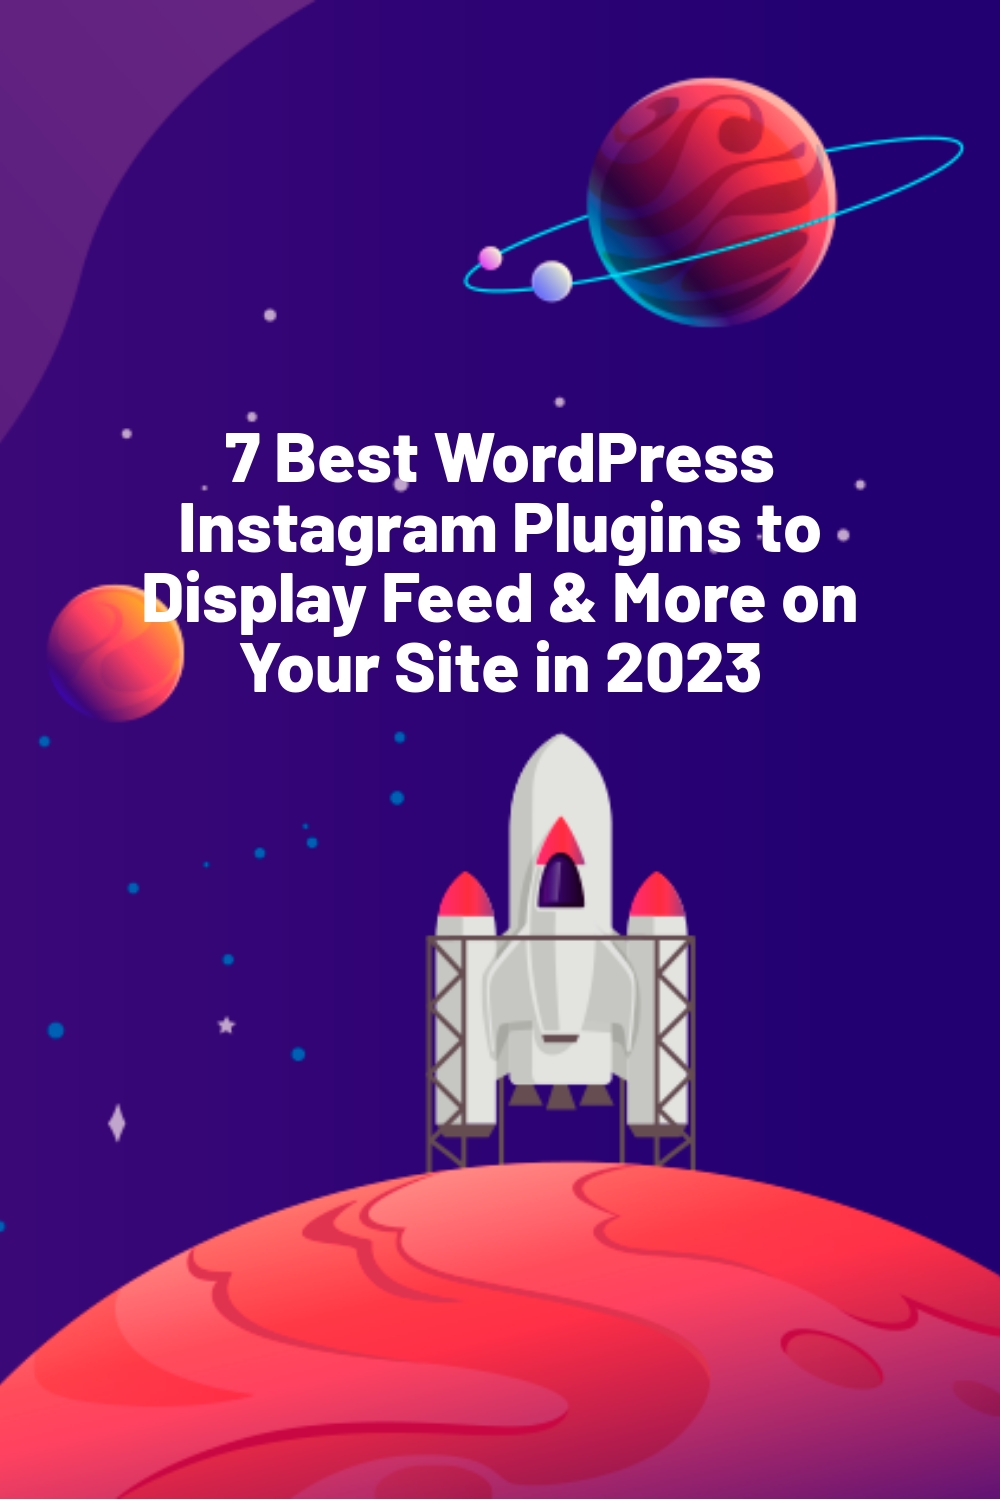 7 Best WordPress Instagram Plugins to Display Feed & More on Your Site in 2023